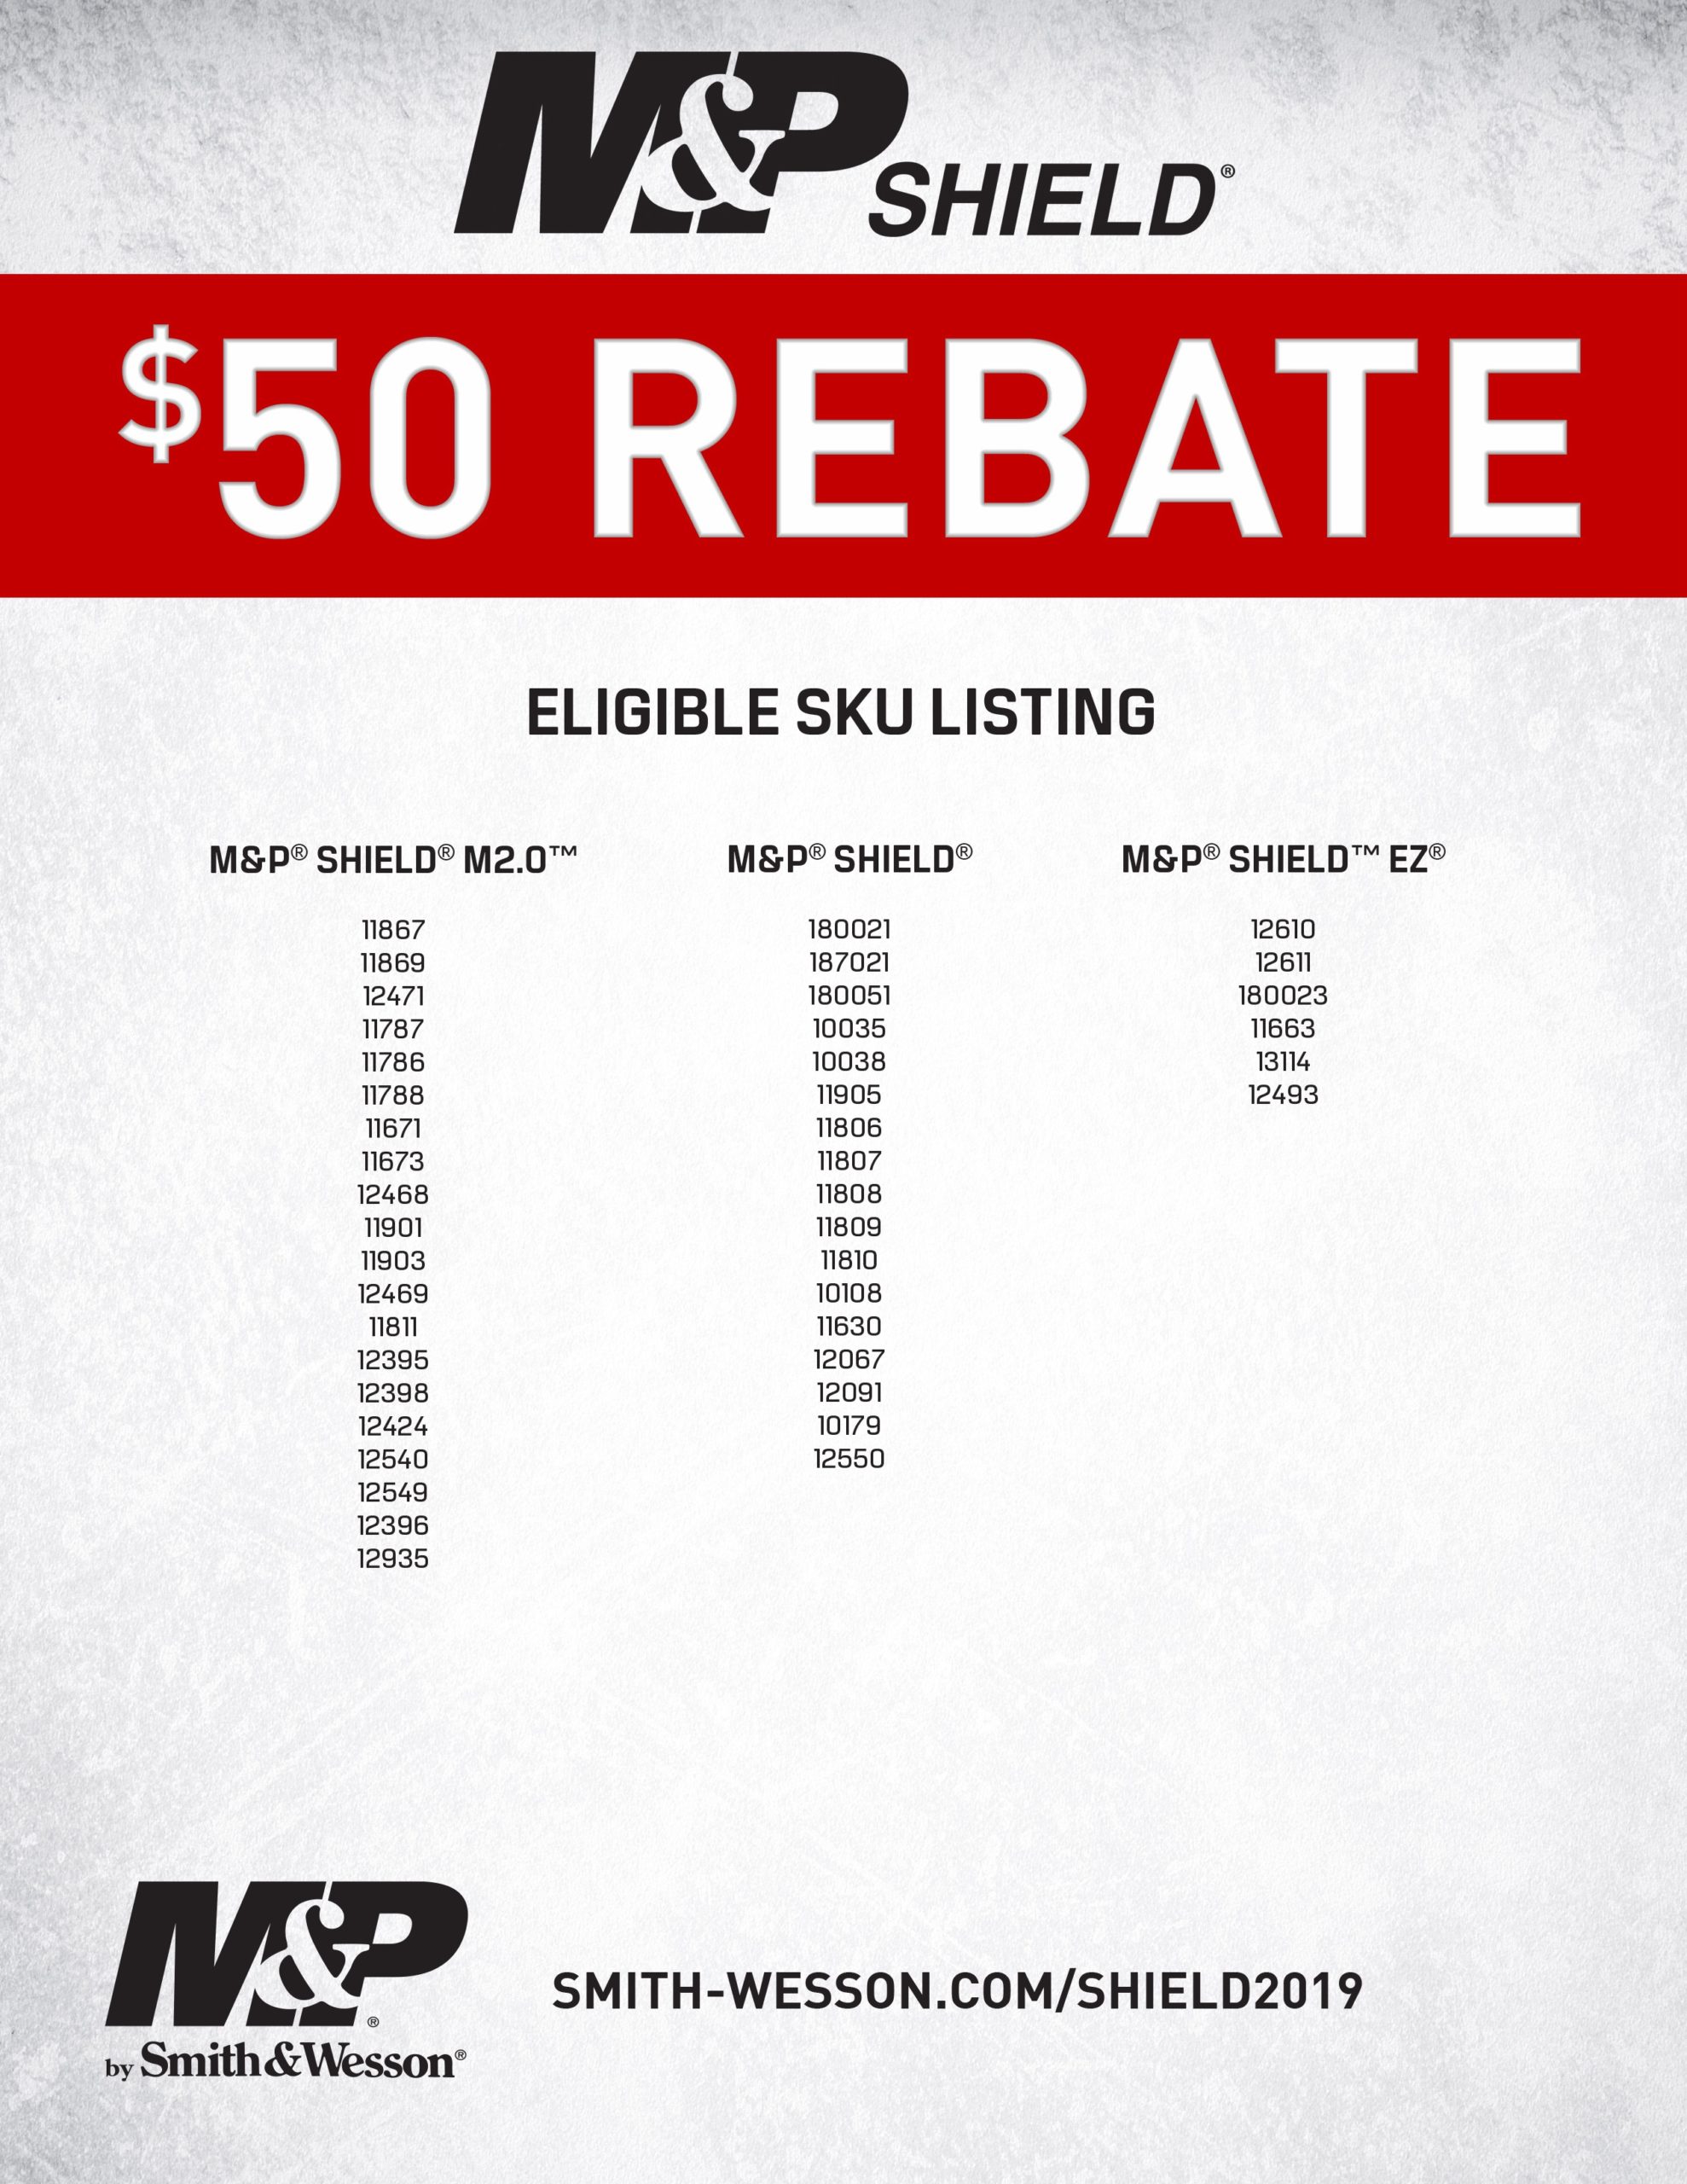 Smith Wesson Brings Back 50 Shield Rebate RECOIL